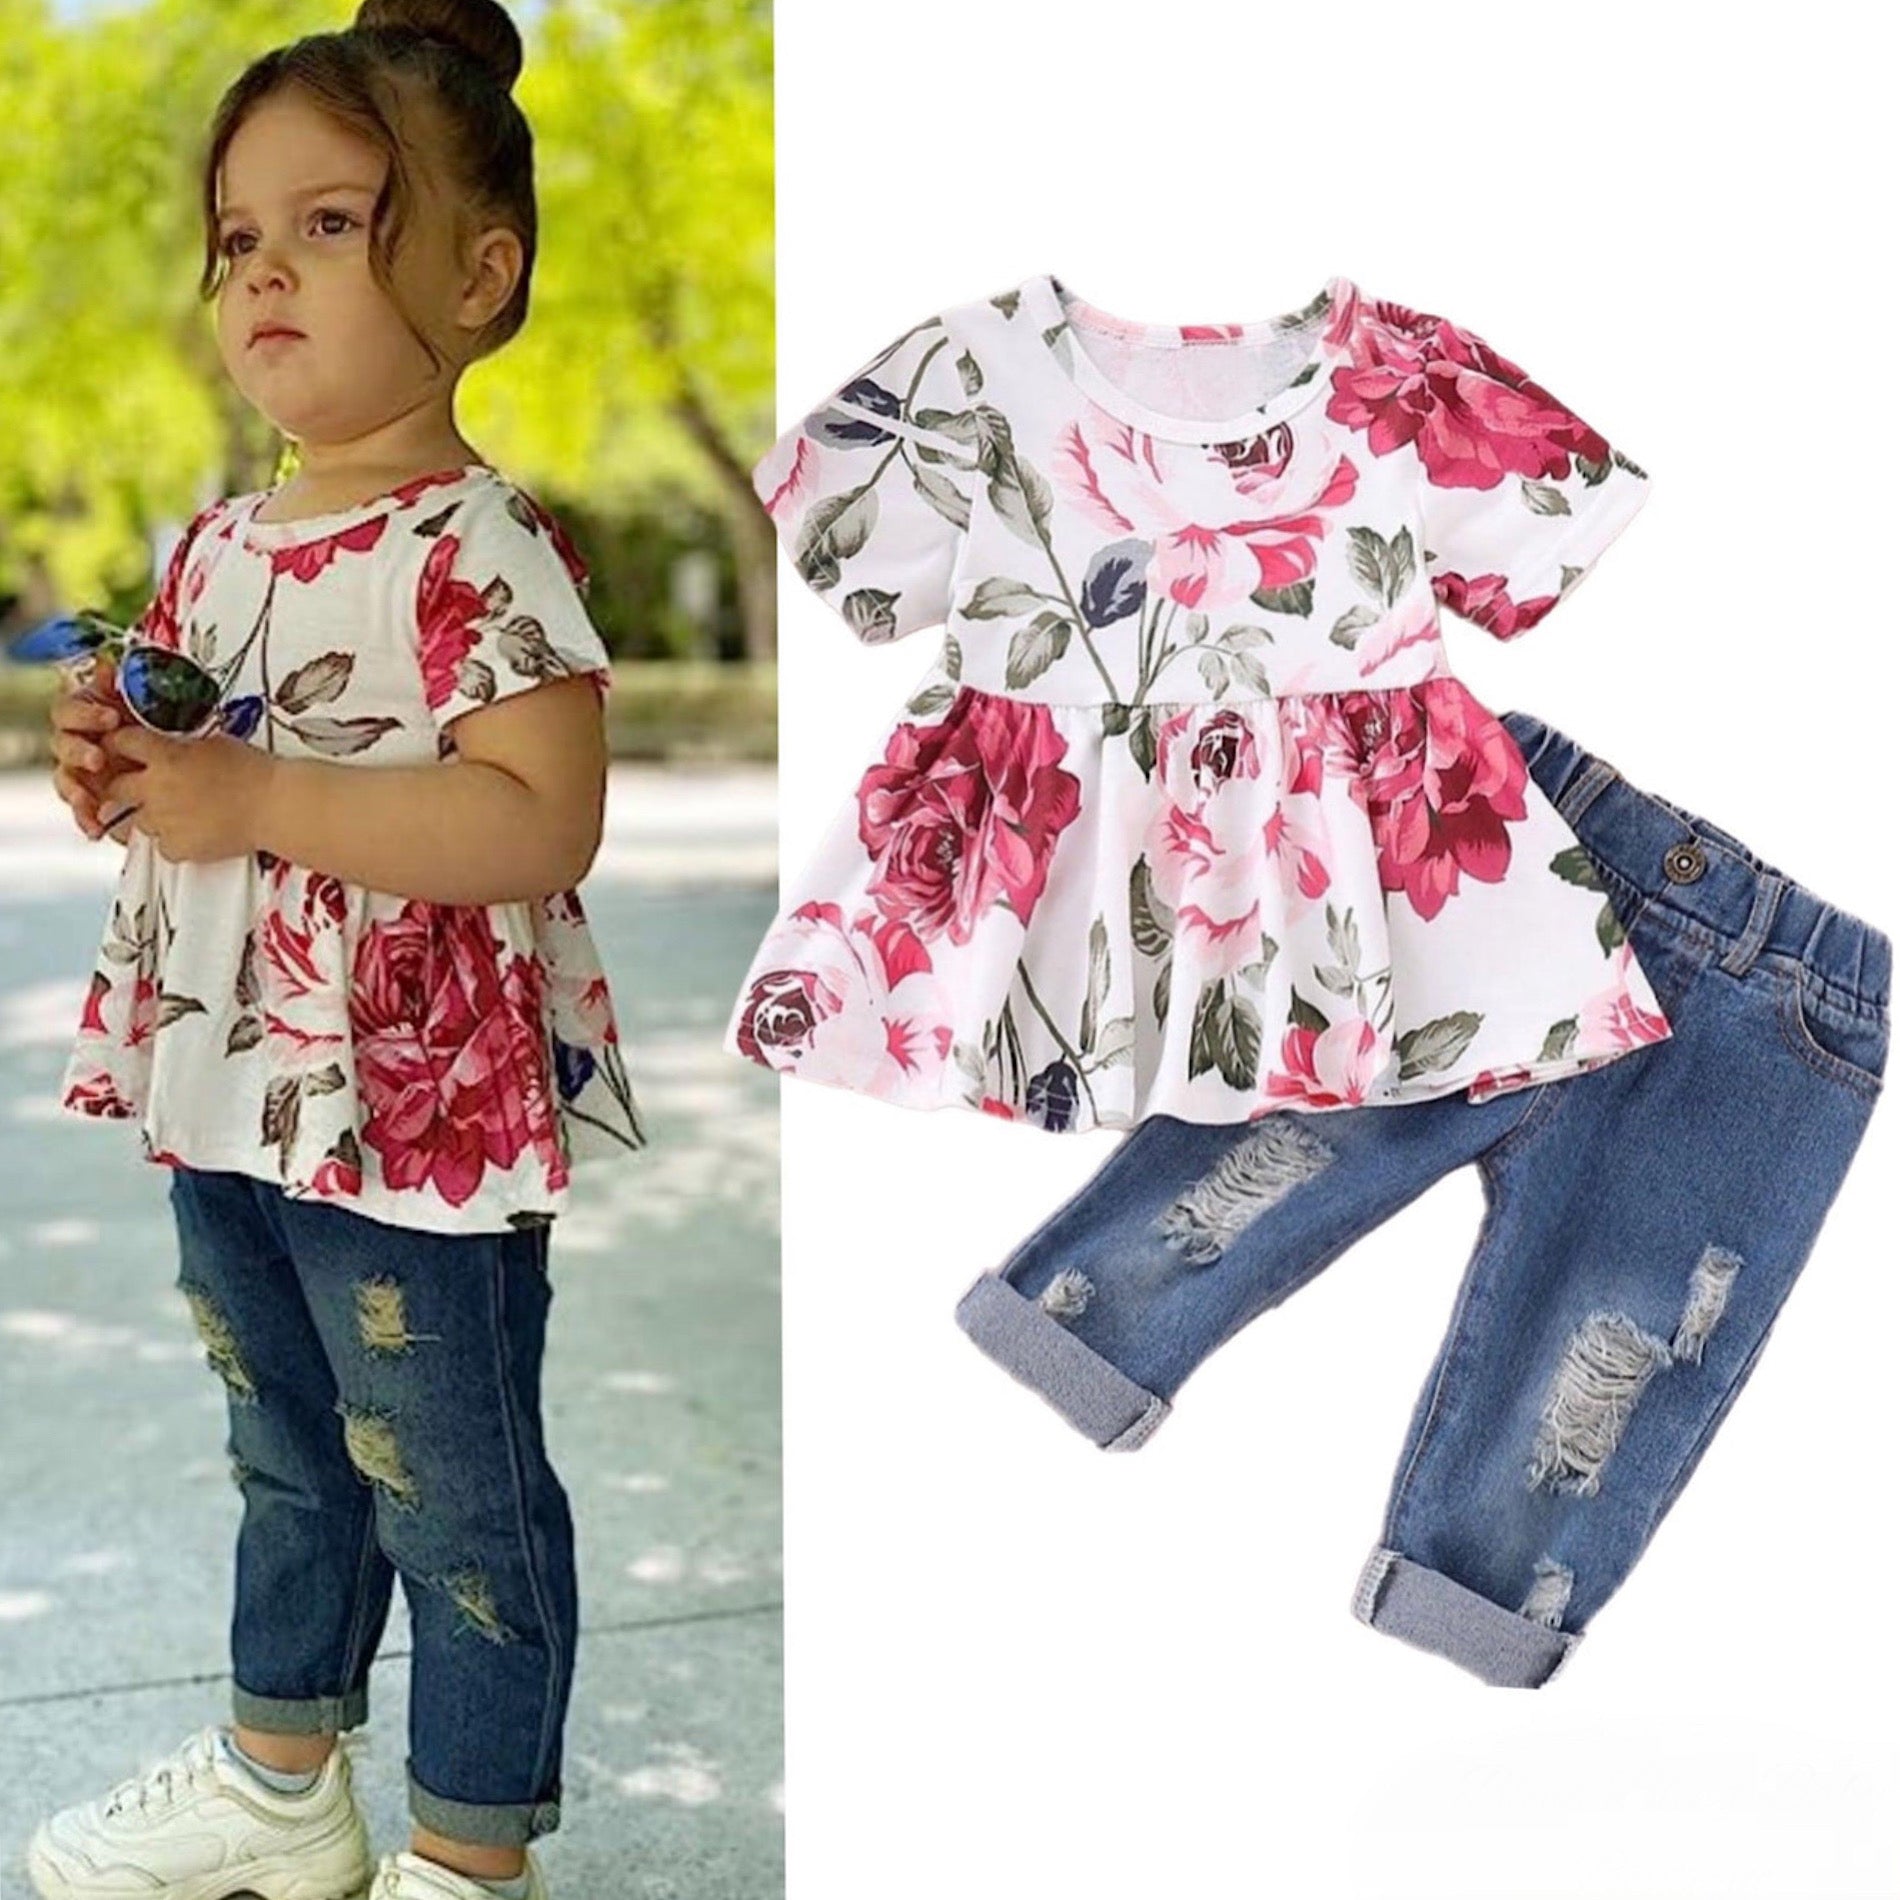 Toddler Girls Baby Clothing Set Casual Floral Top Distressed Jeans, Main Image